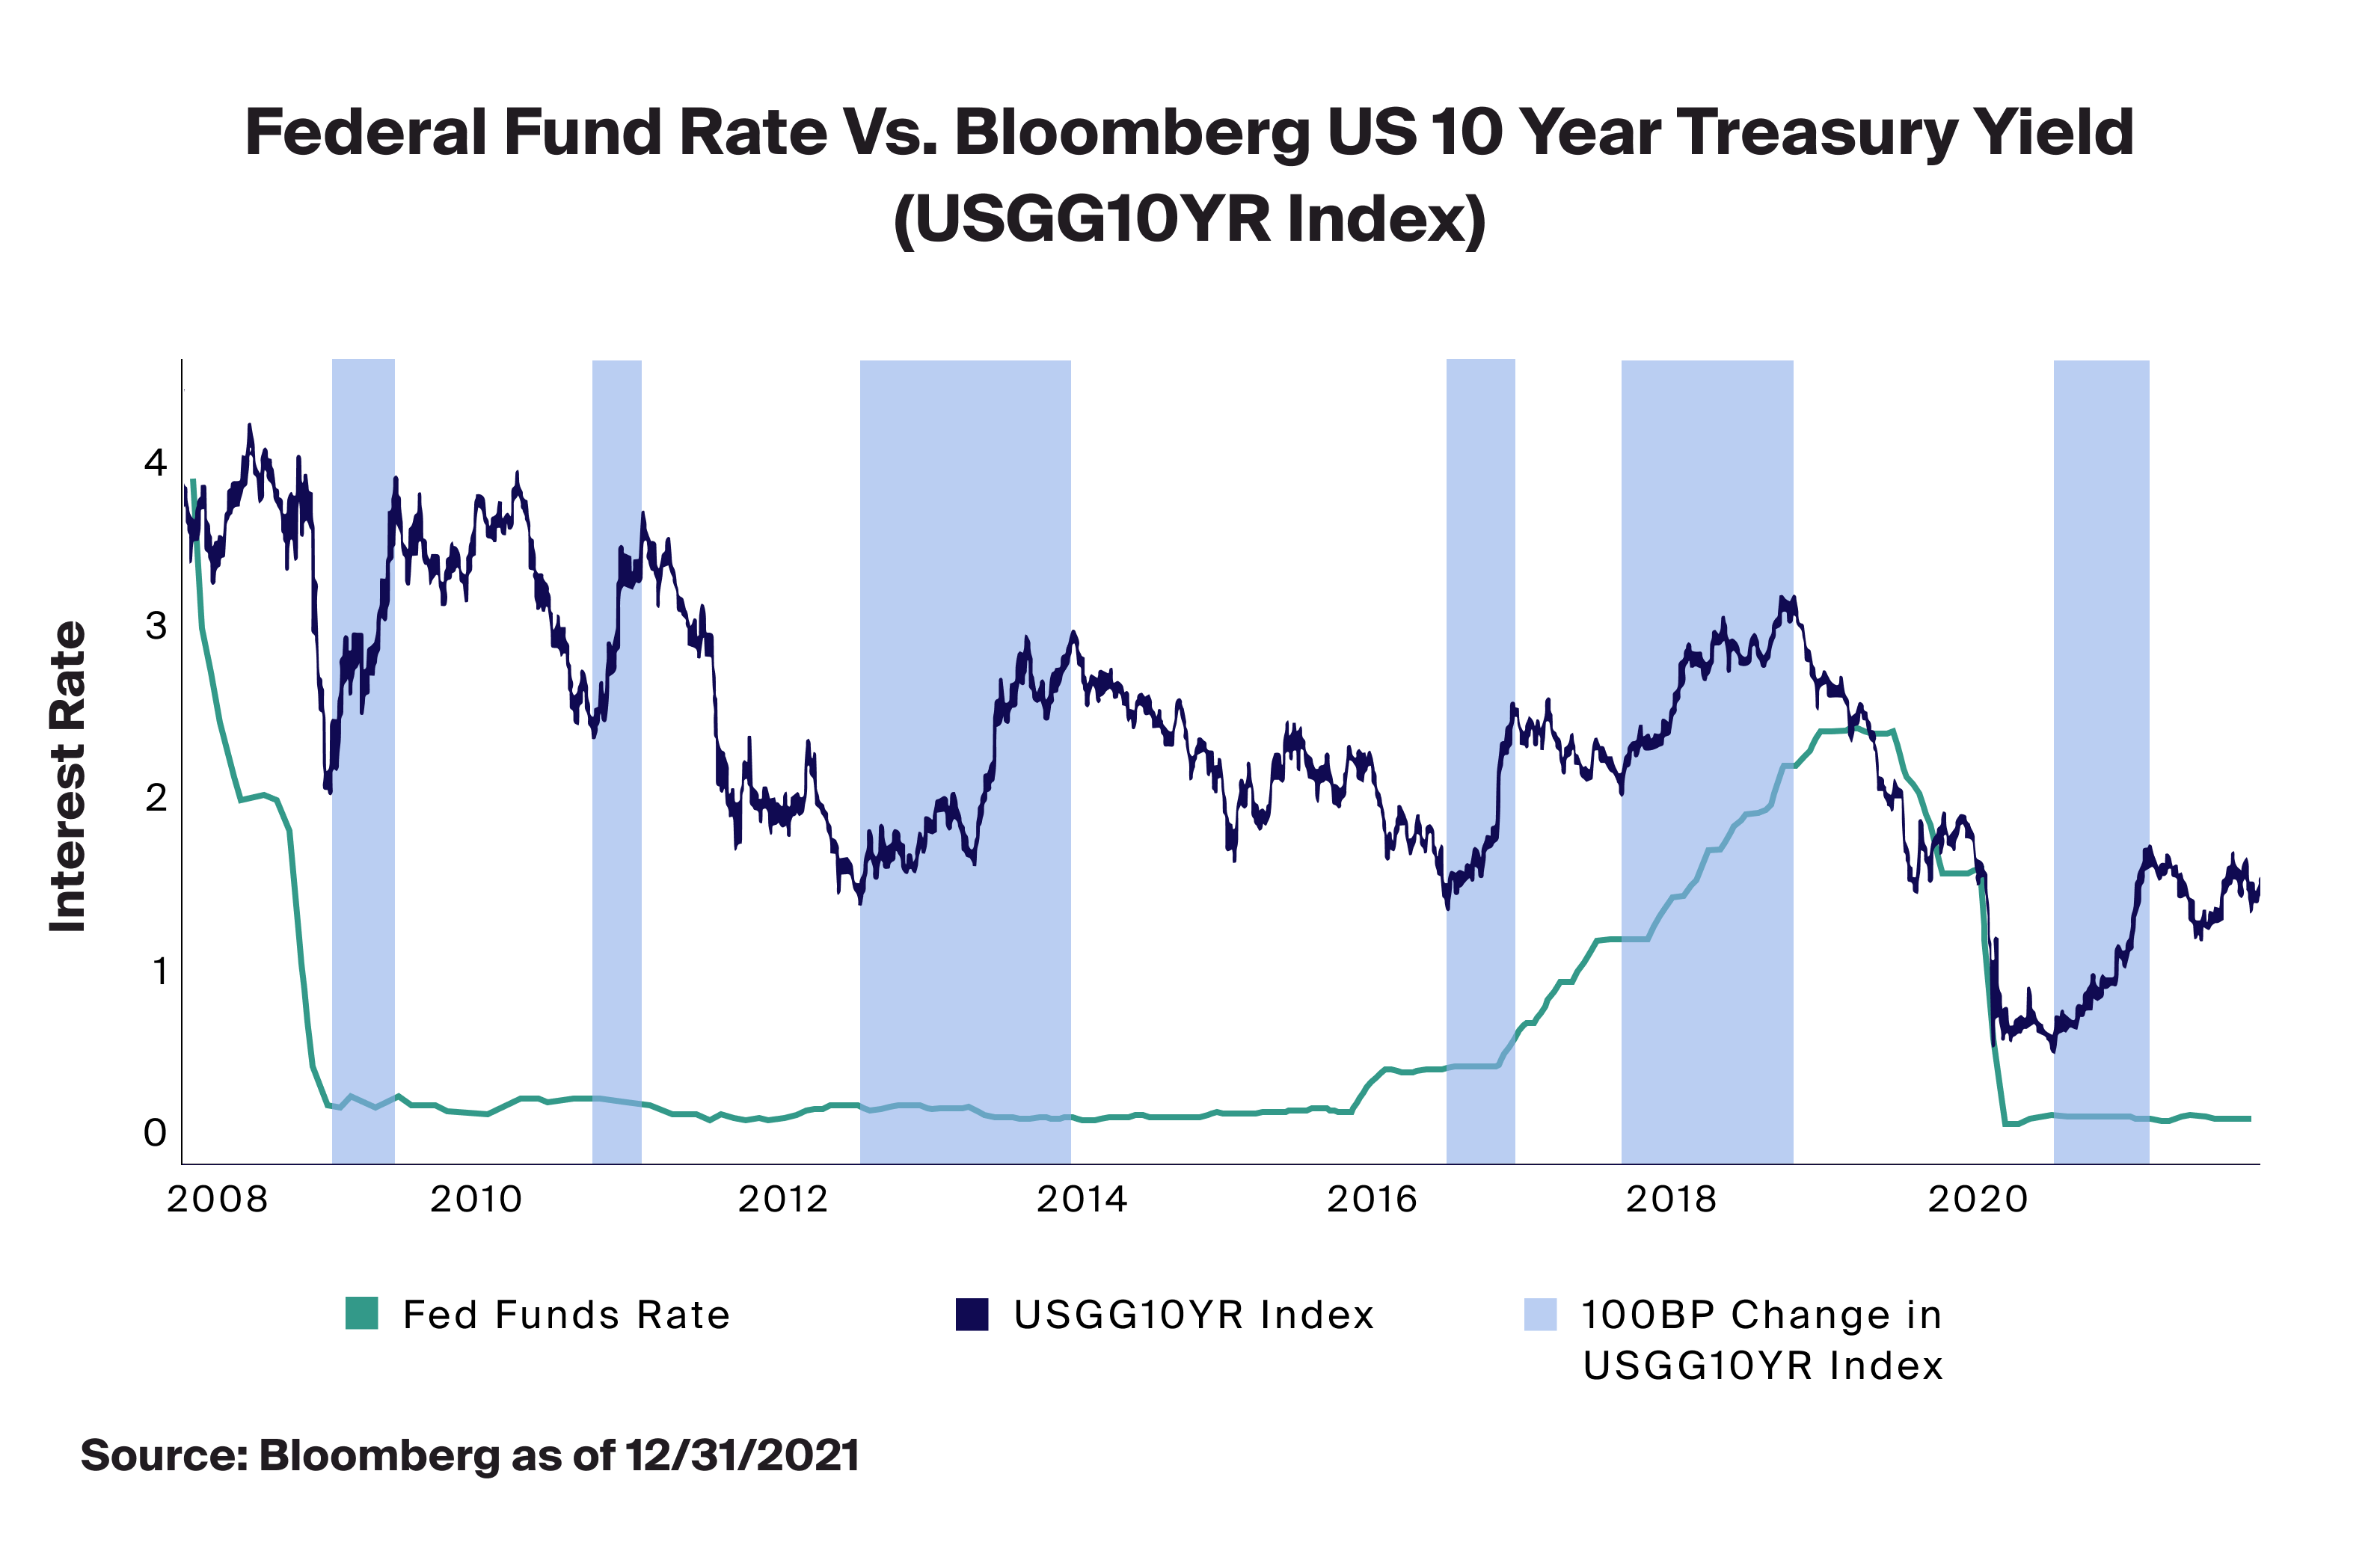 Federal Funds Rate Vs. USGG10YR